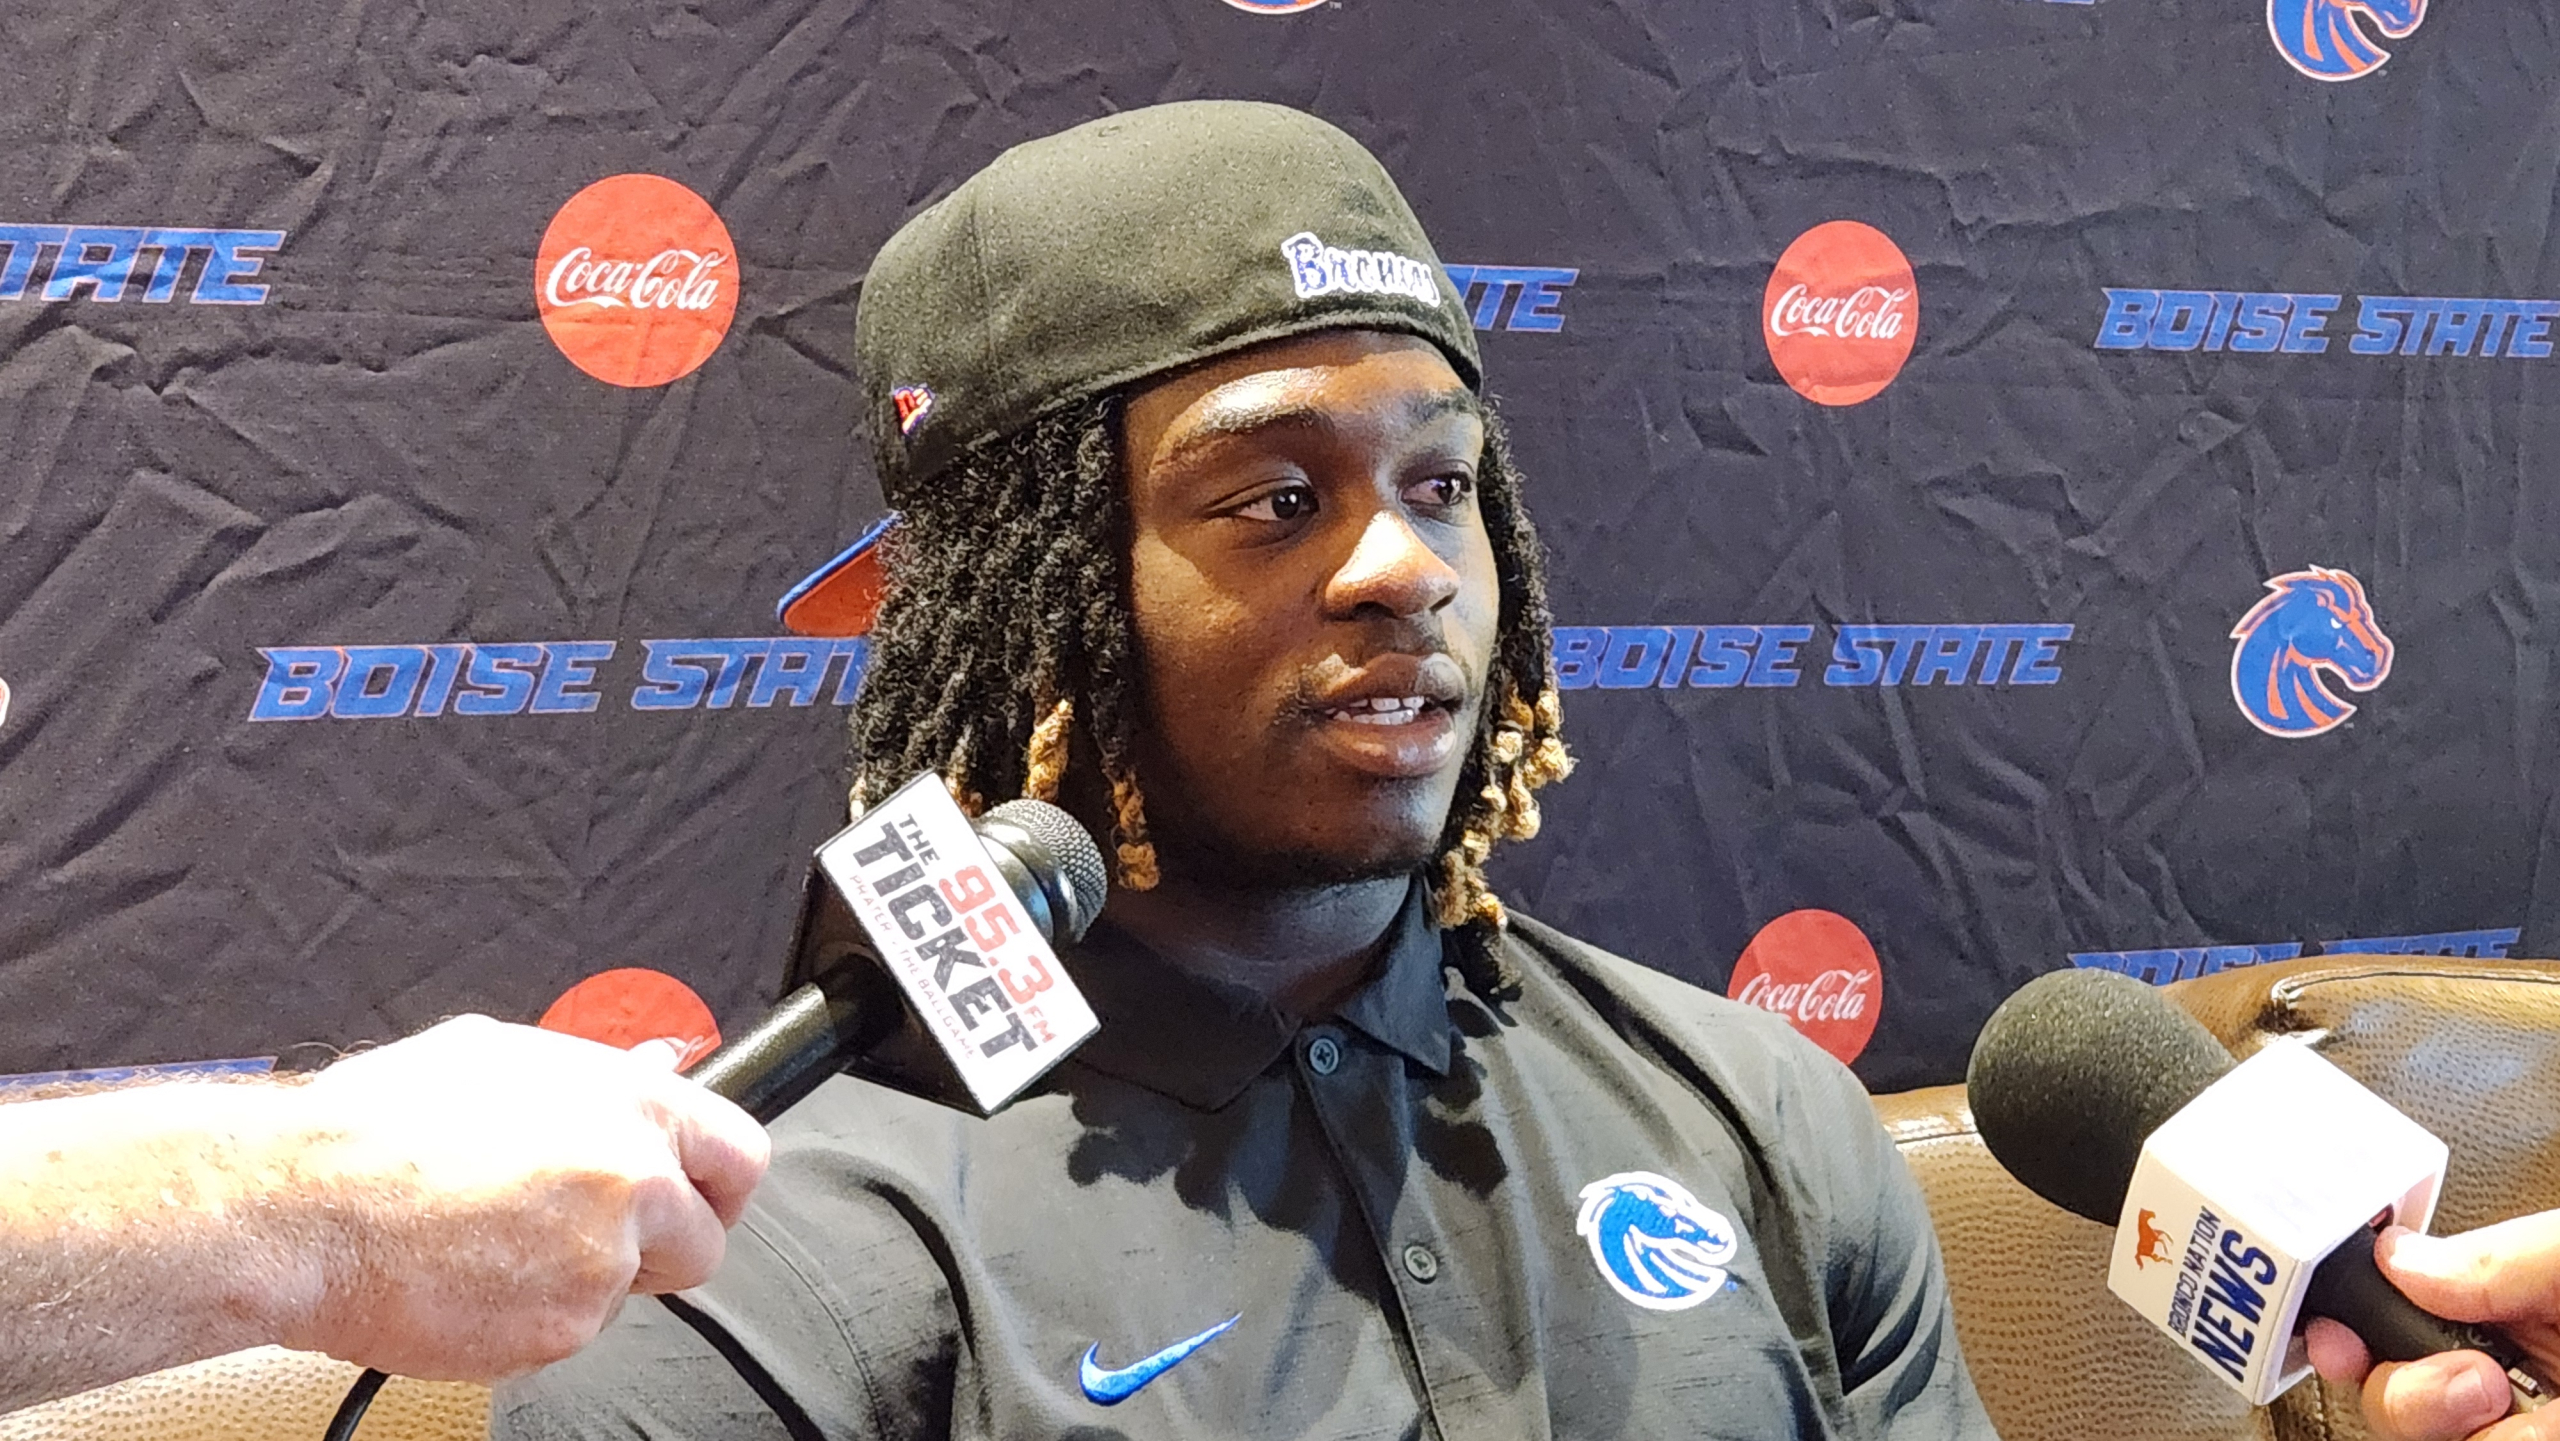 ASHTON JEANTY: OUR EXCLUSIVE 20-MINUTE INTERVIEW WITH BOISE STATE’S RB STAR